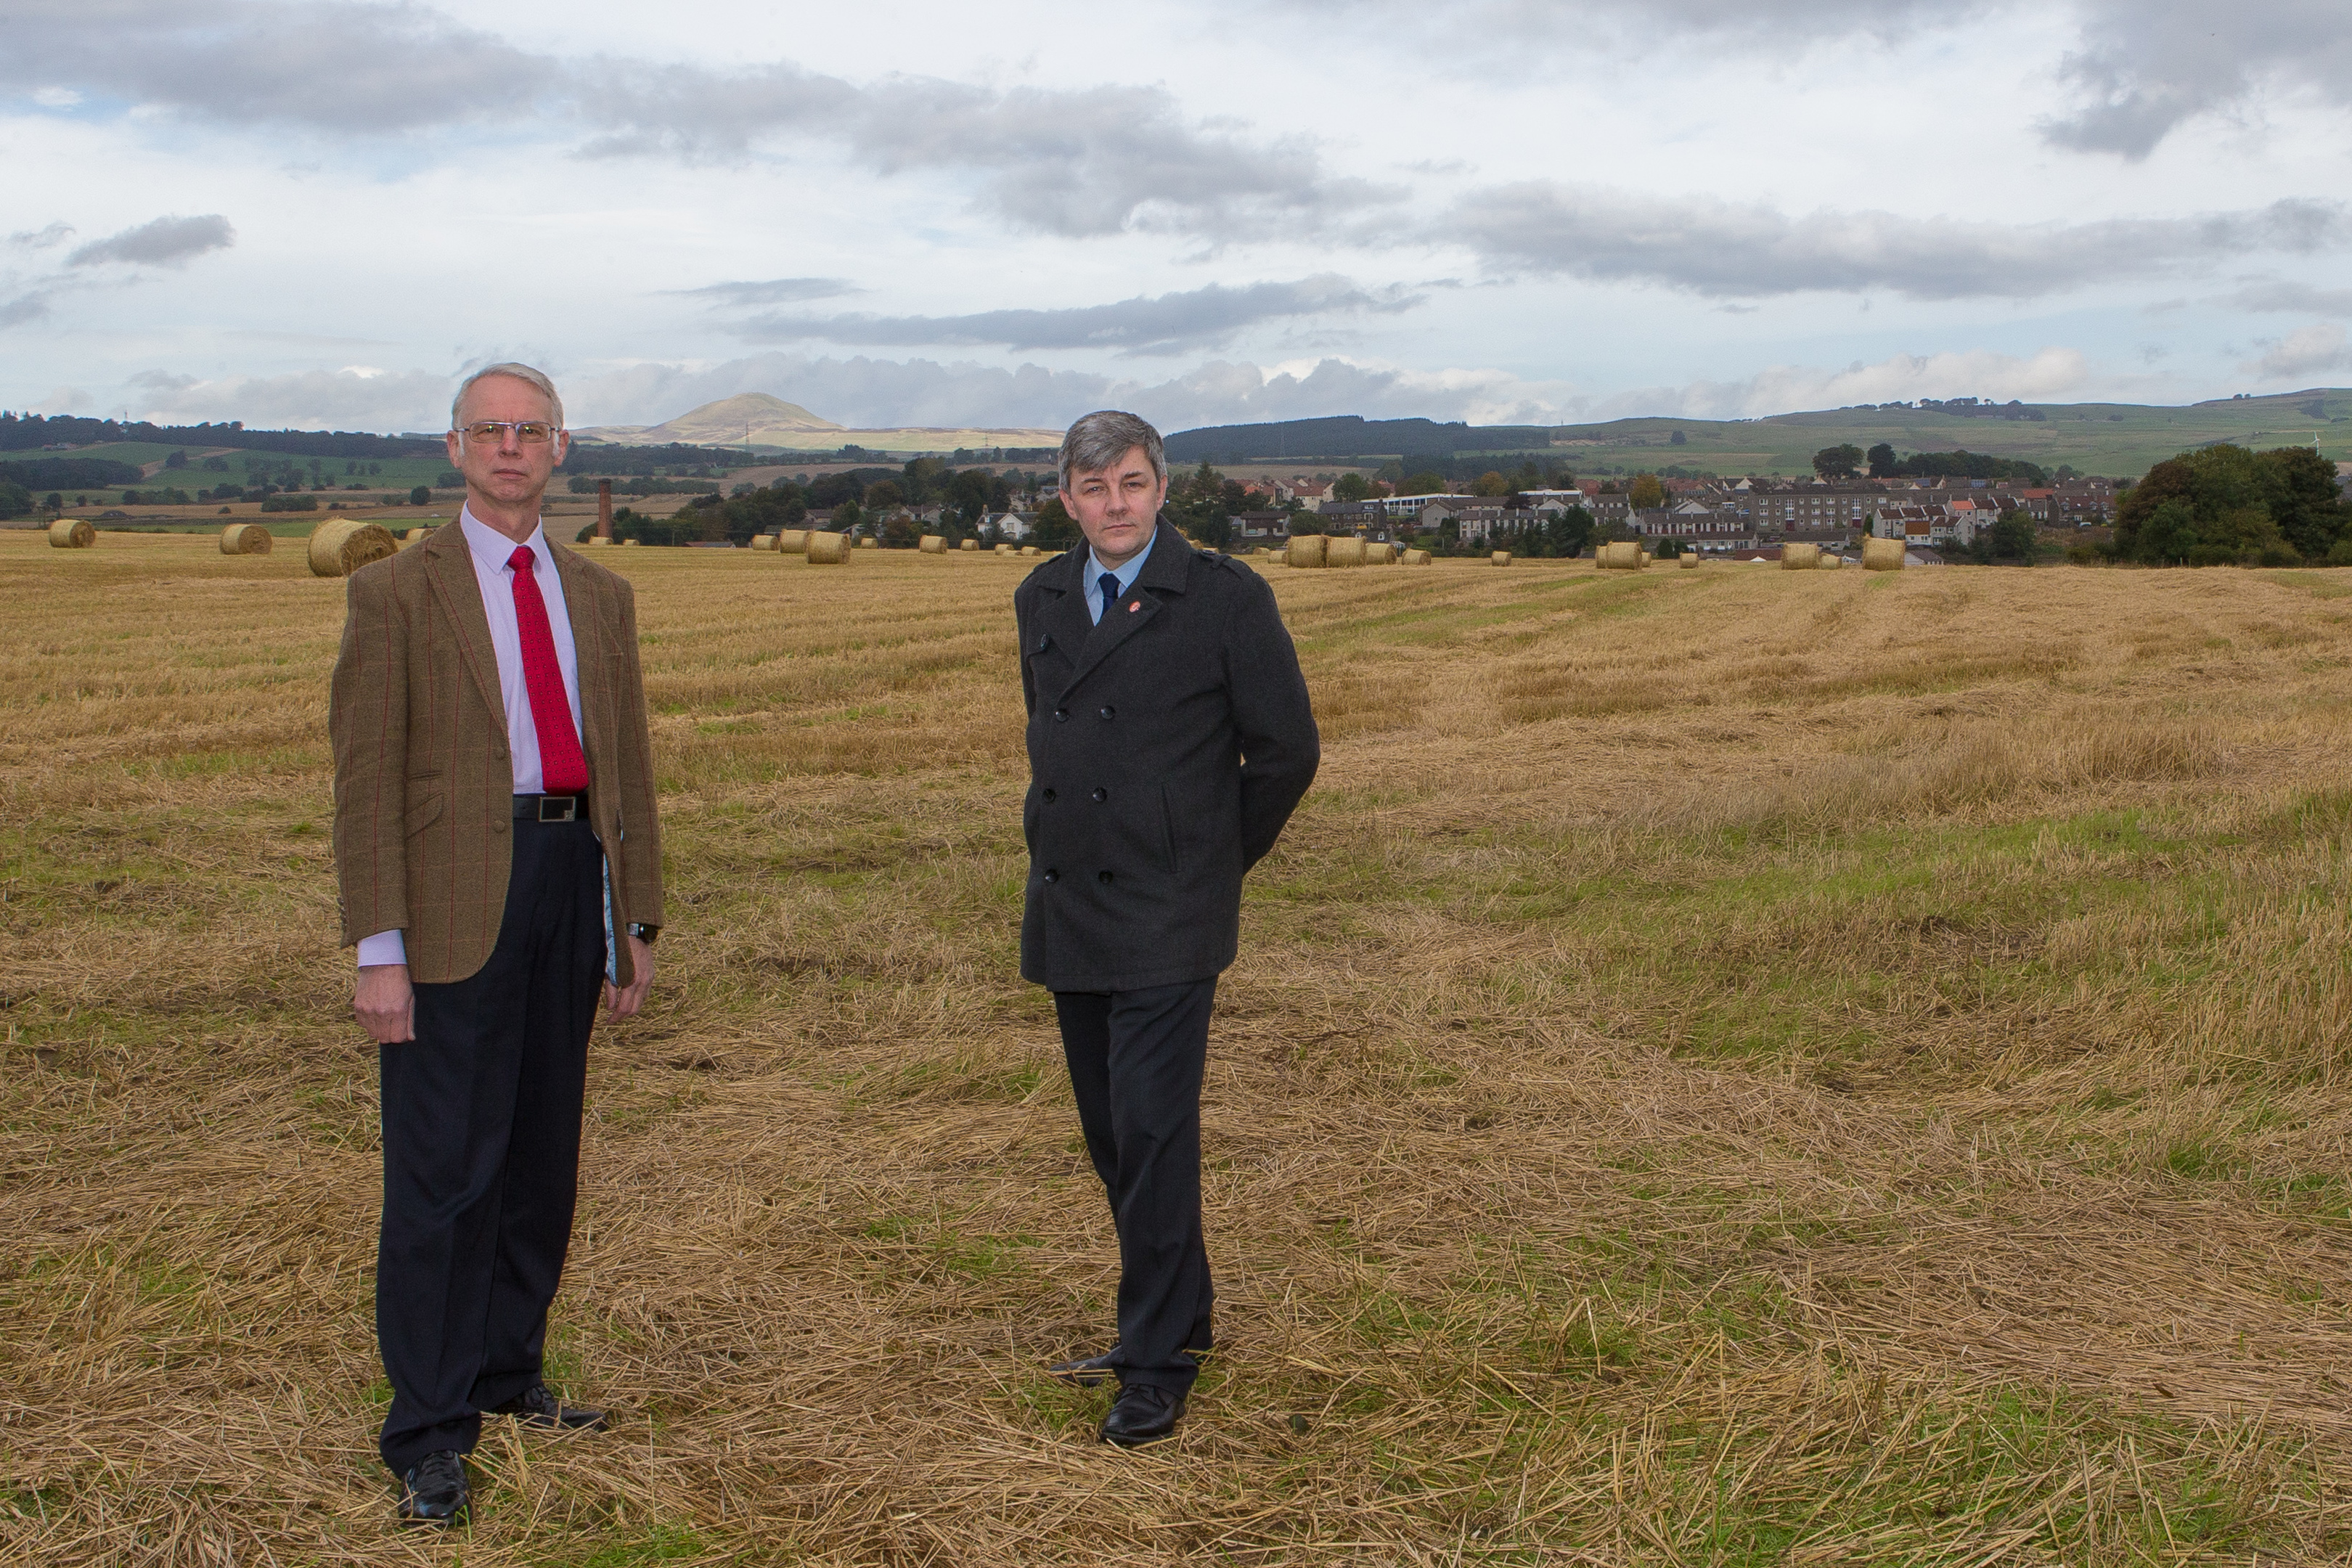 Cllr John Wincott and Cllr Altany Craik at the proposed site for the Milldean Housing Project which was declined.